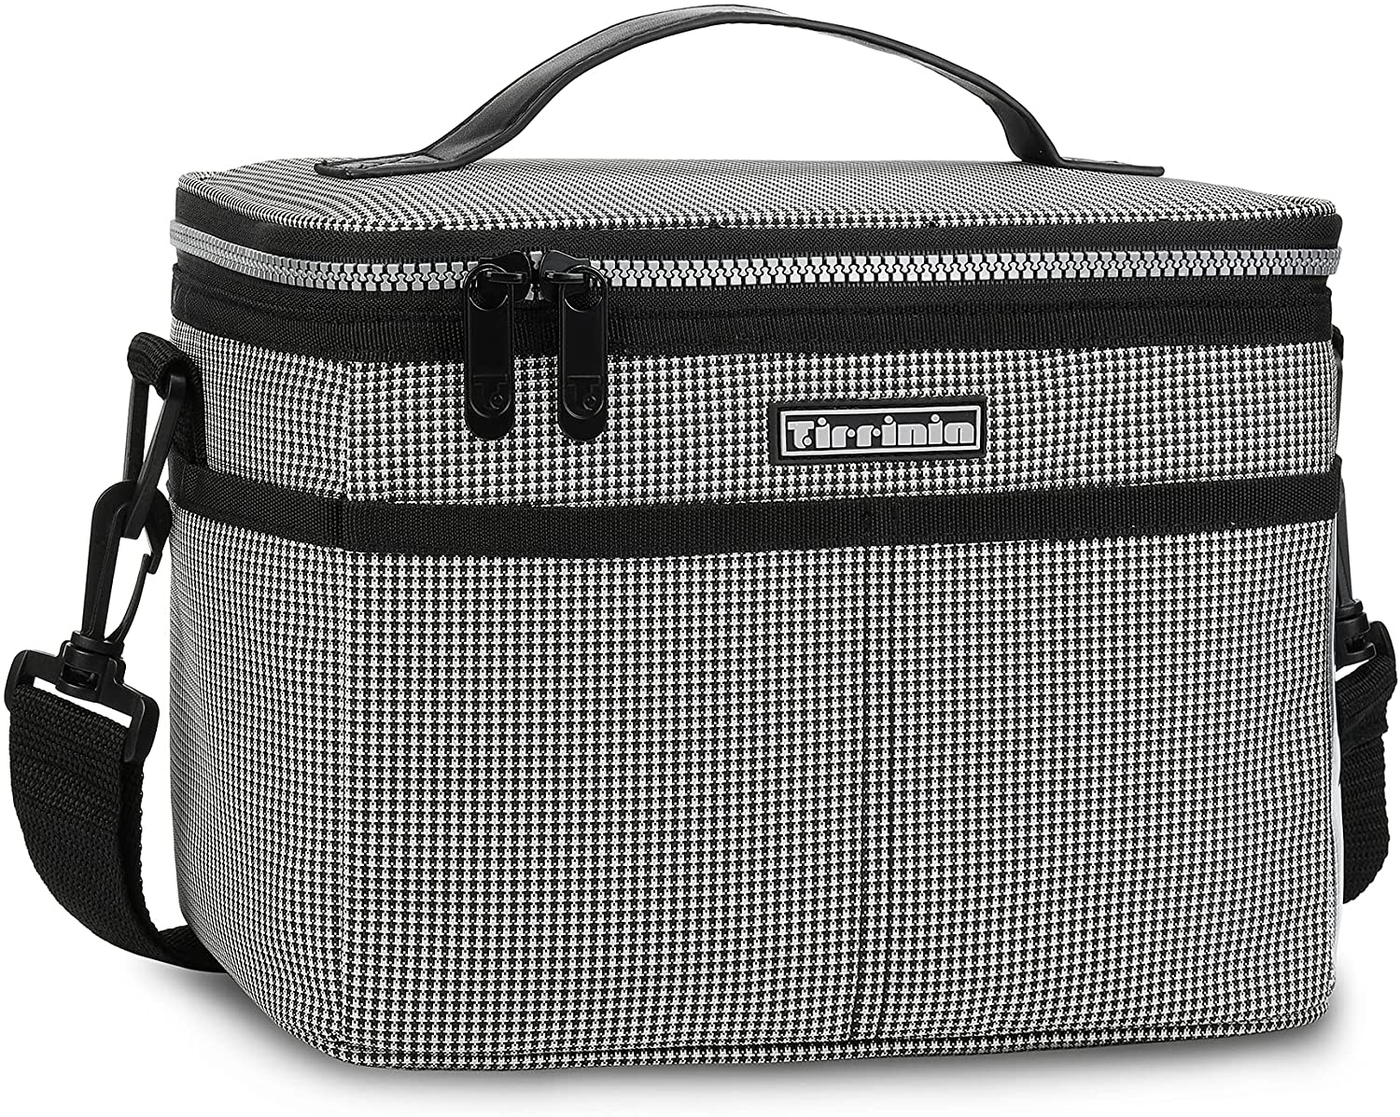 Insulated Lunch Box for Women Men, Leakproof Thermal Reusable Lunch Bag with 4 Pockets for Adult & Kids, Lunch Bag Cooler Tote for Office Work by Tirrinia, Grey Checkered